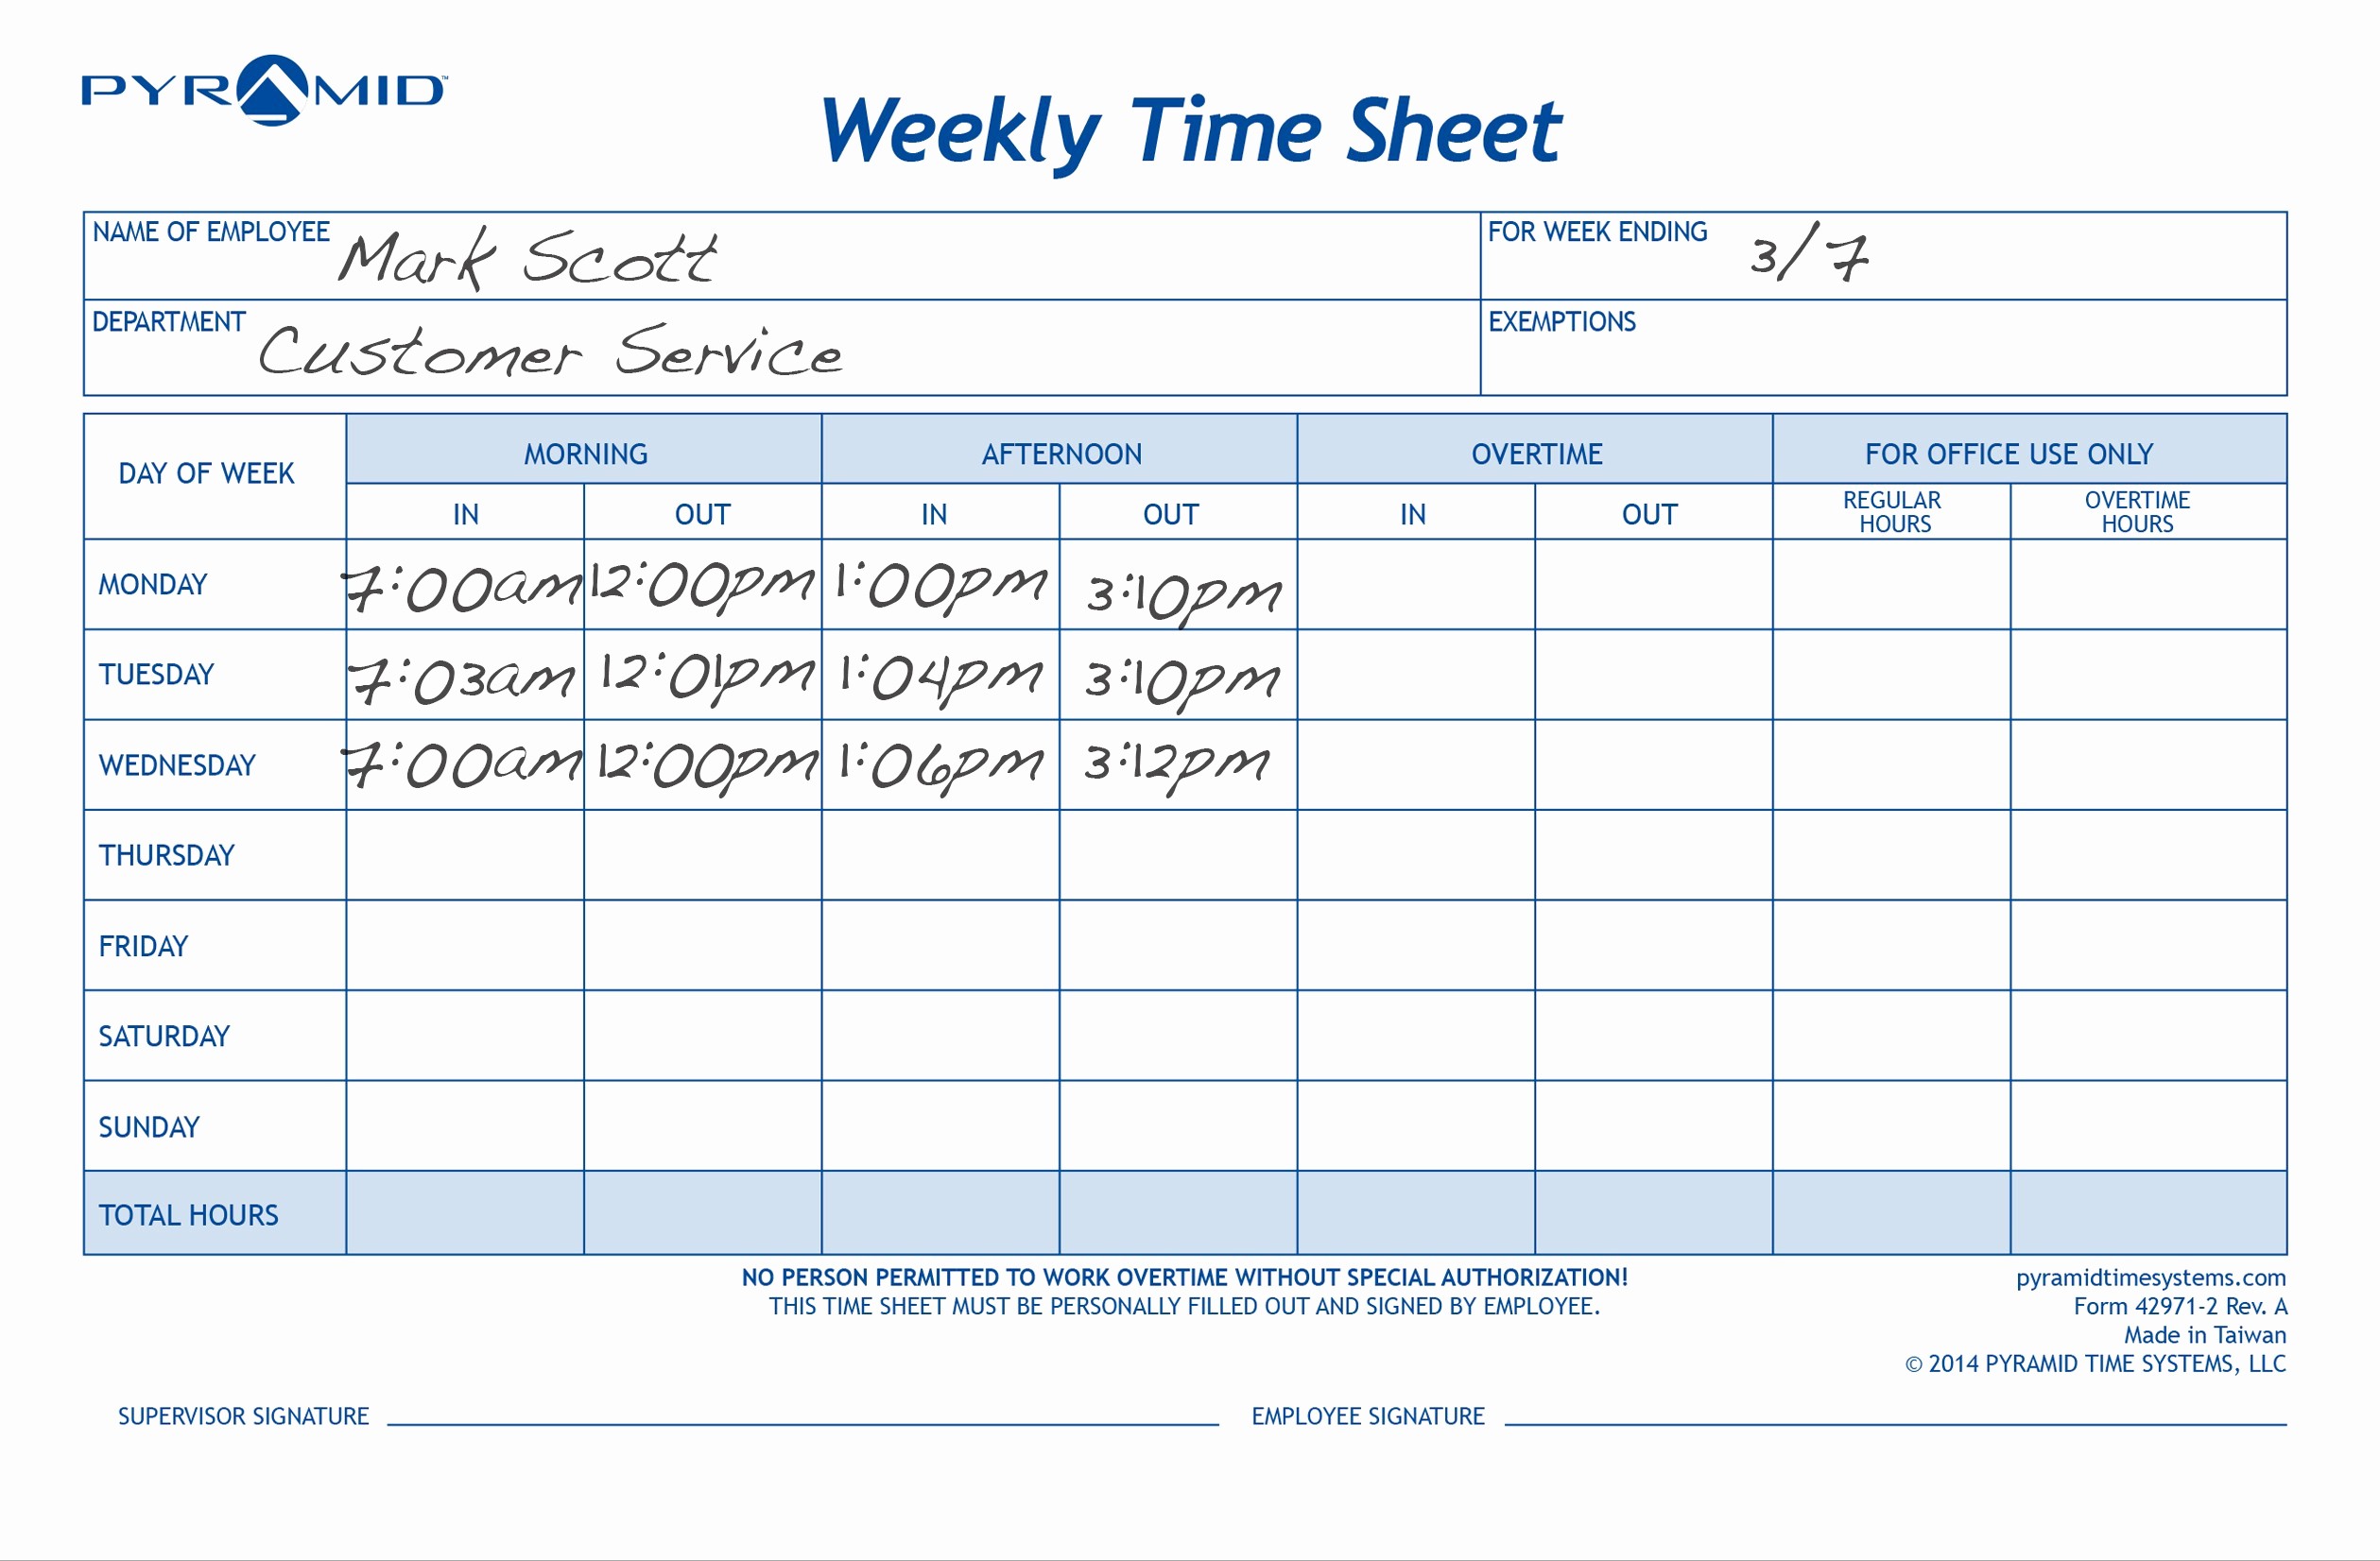 Clock In and Out Timesheet Luxury Timesheet Clock Timeline Spreadshee Timesheet Clockwise